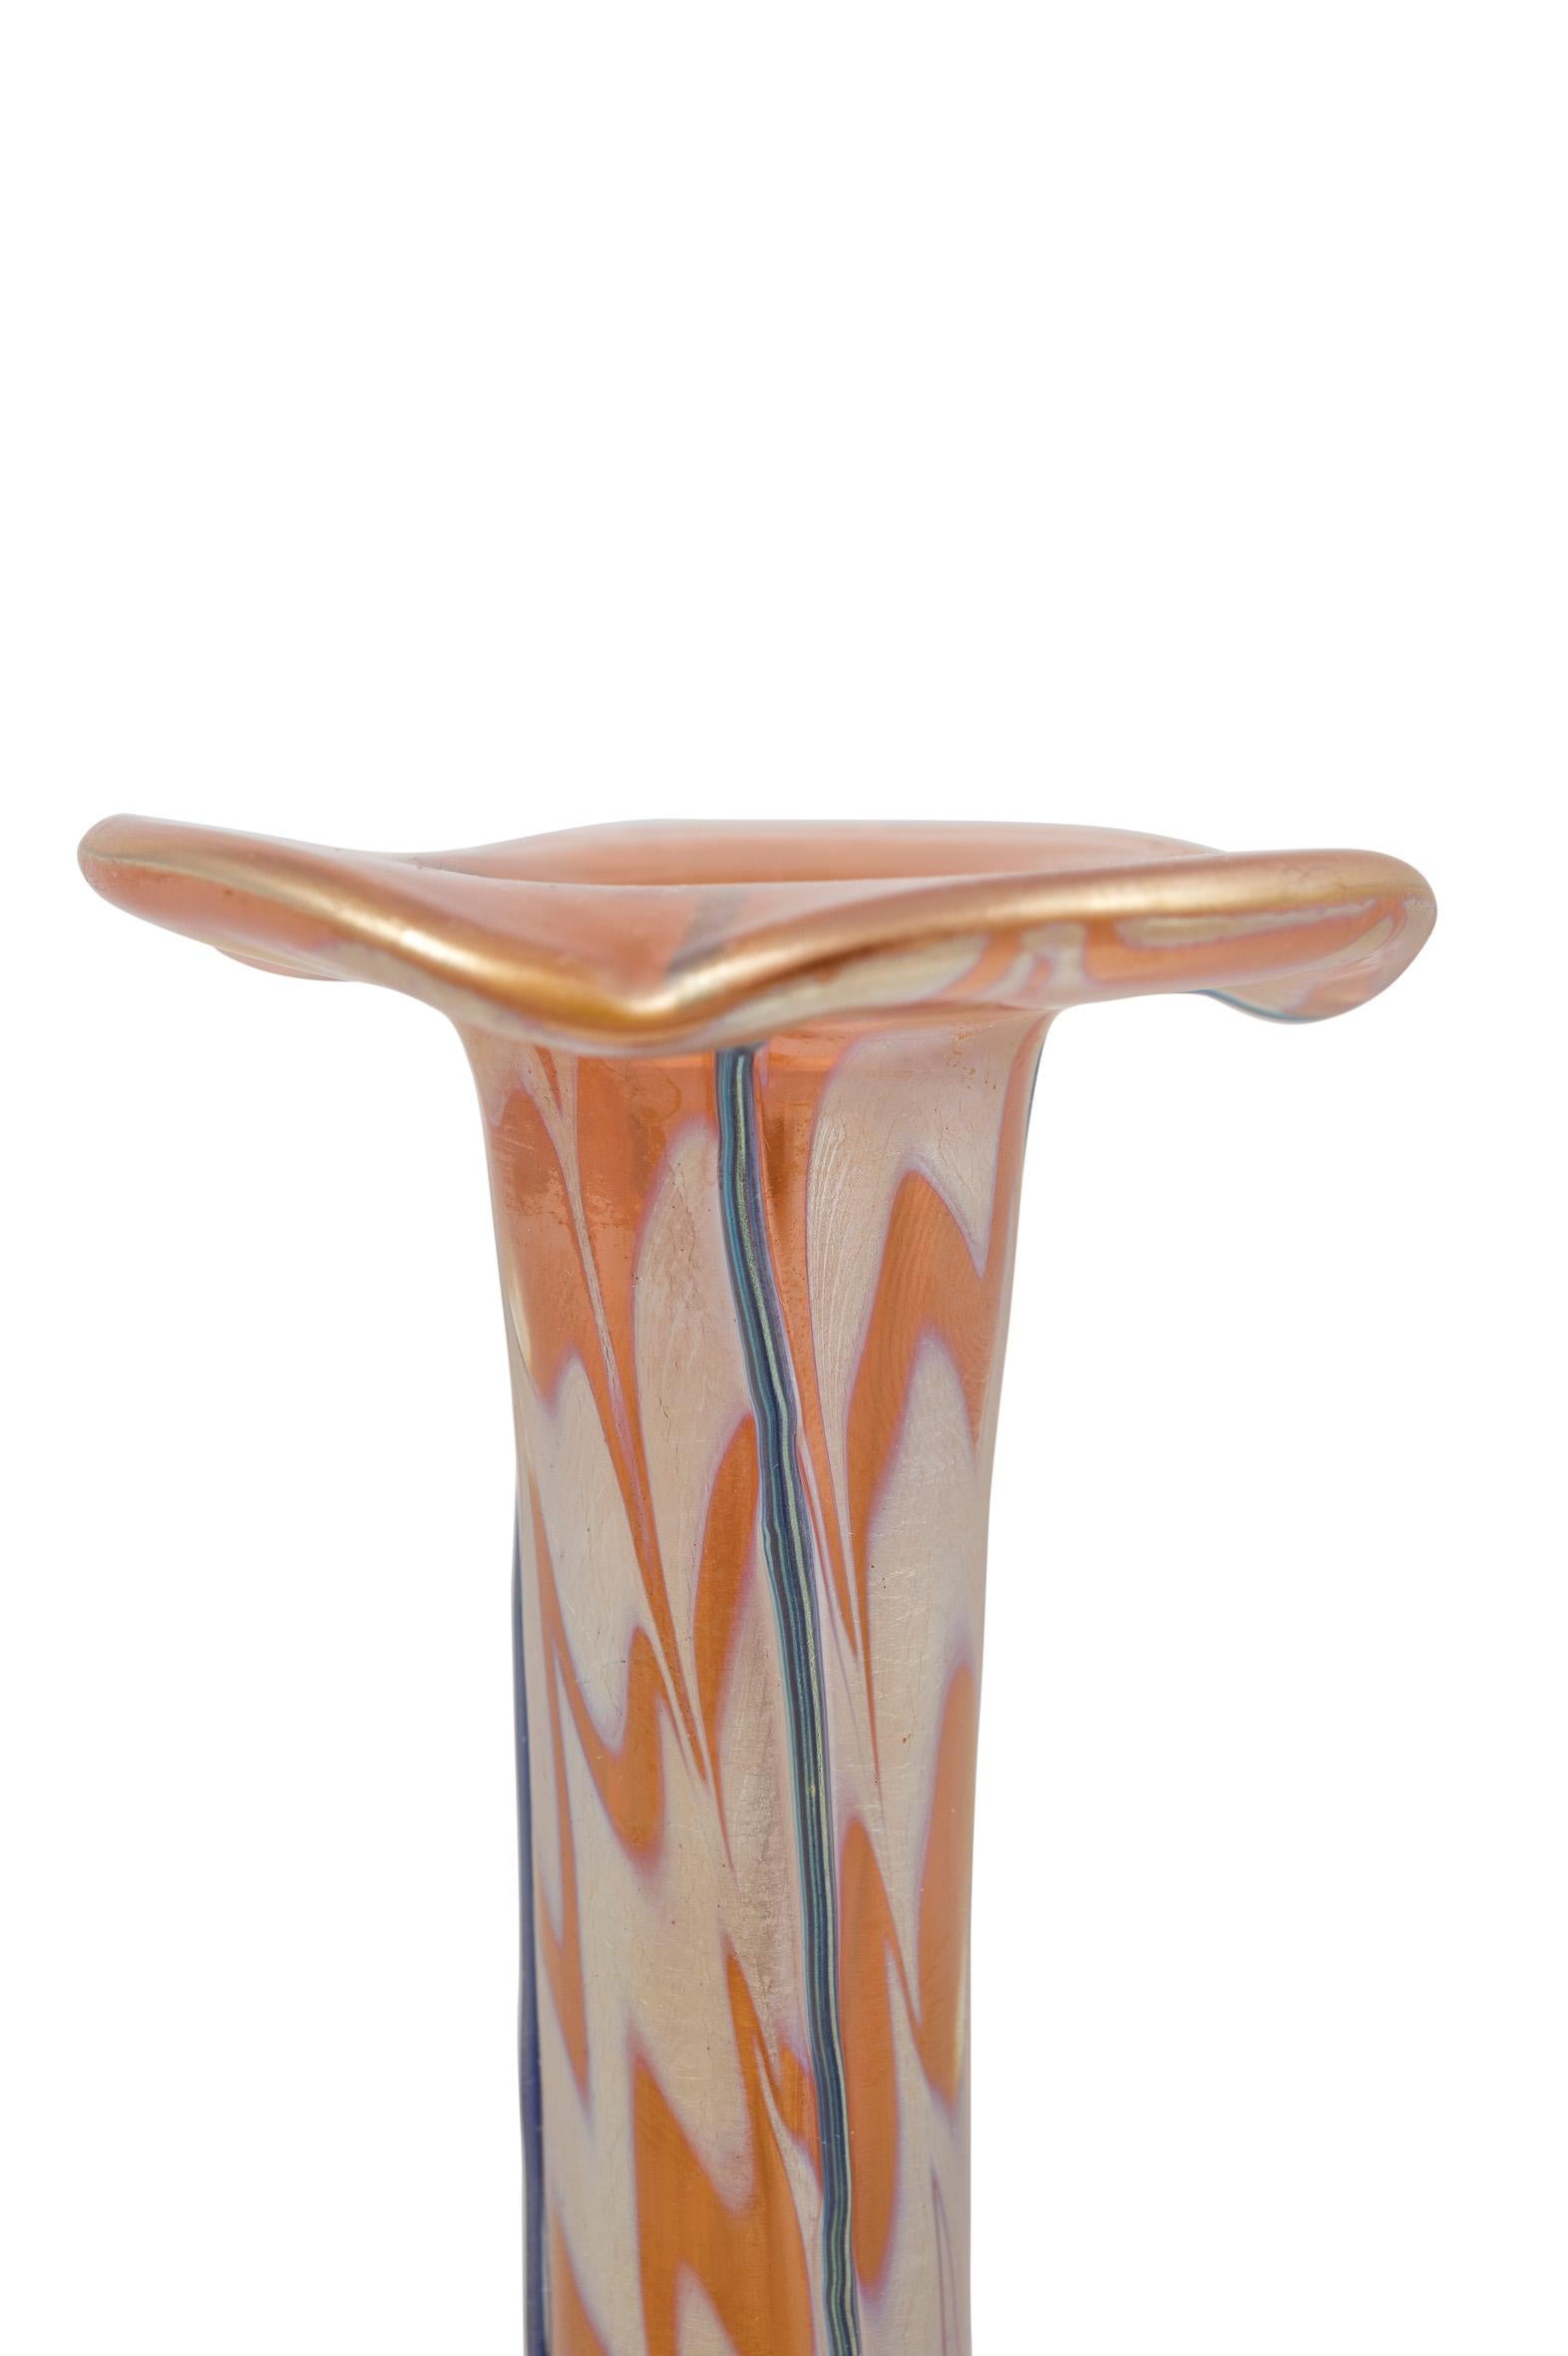 Glass Vase Loetz with Drop Applications Blue Orange Iridescent, circa 1901 In Good Condition For Sale In Klosterneuburg, AT